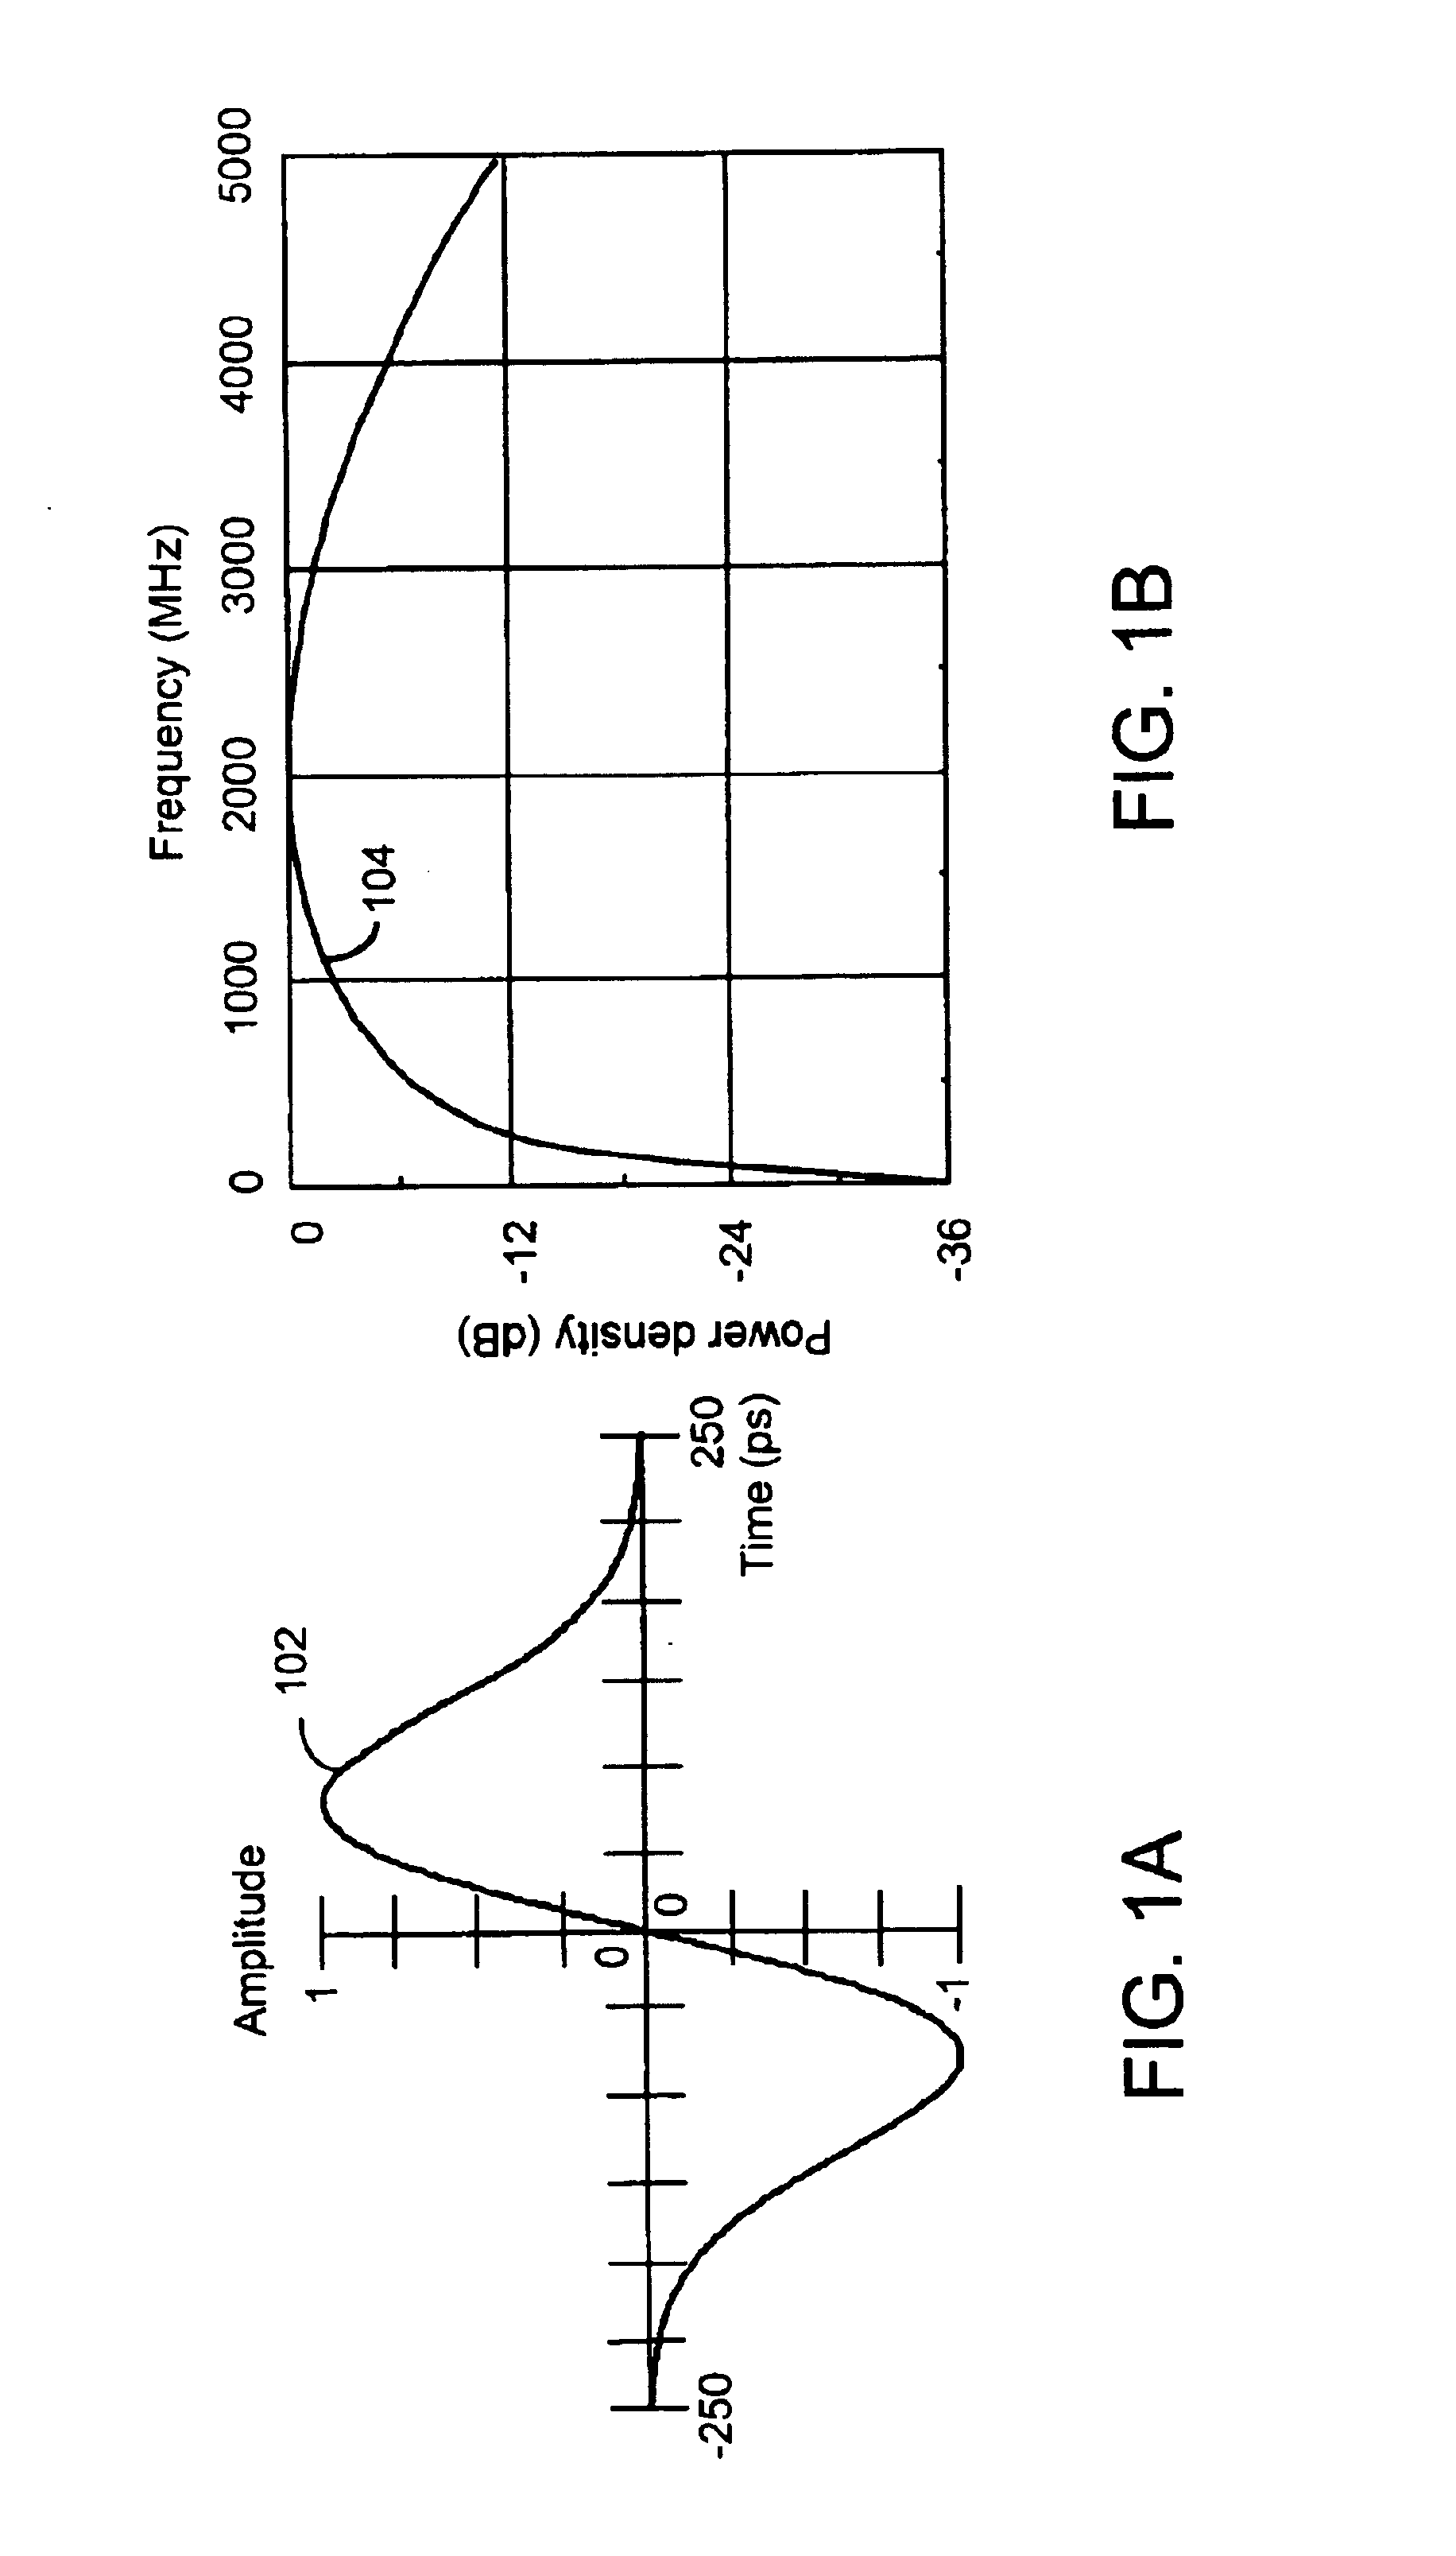 Direct-path-signal detection apparatus and associated methods